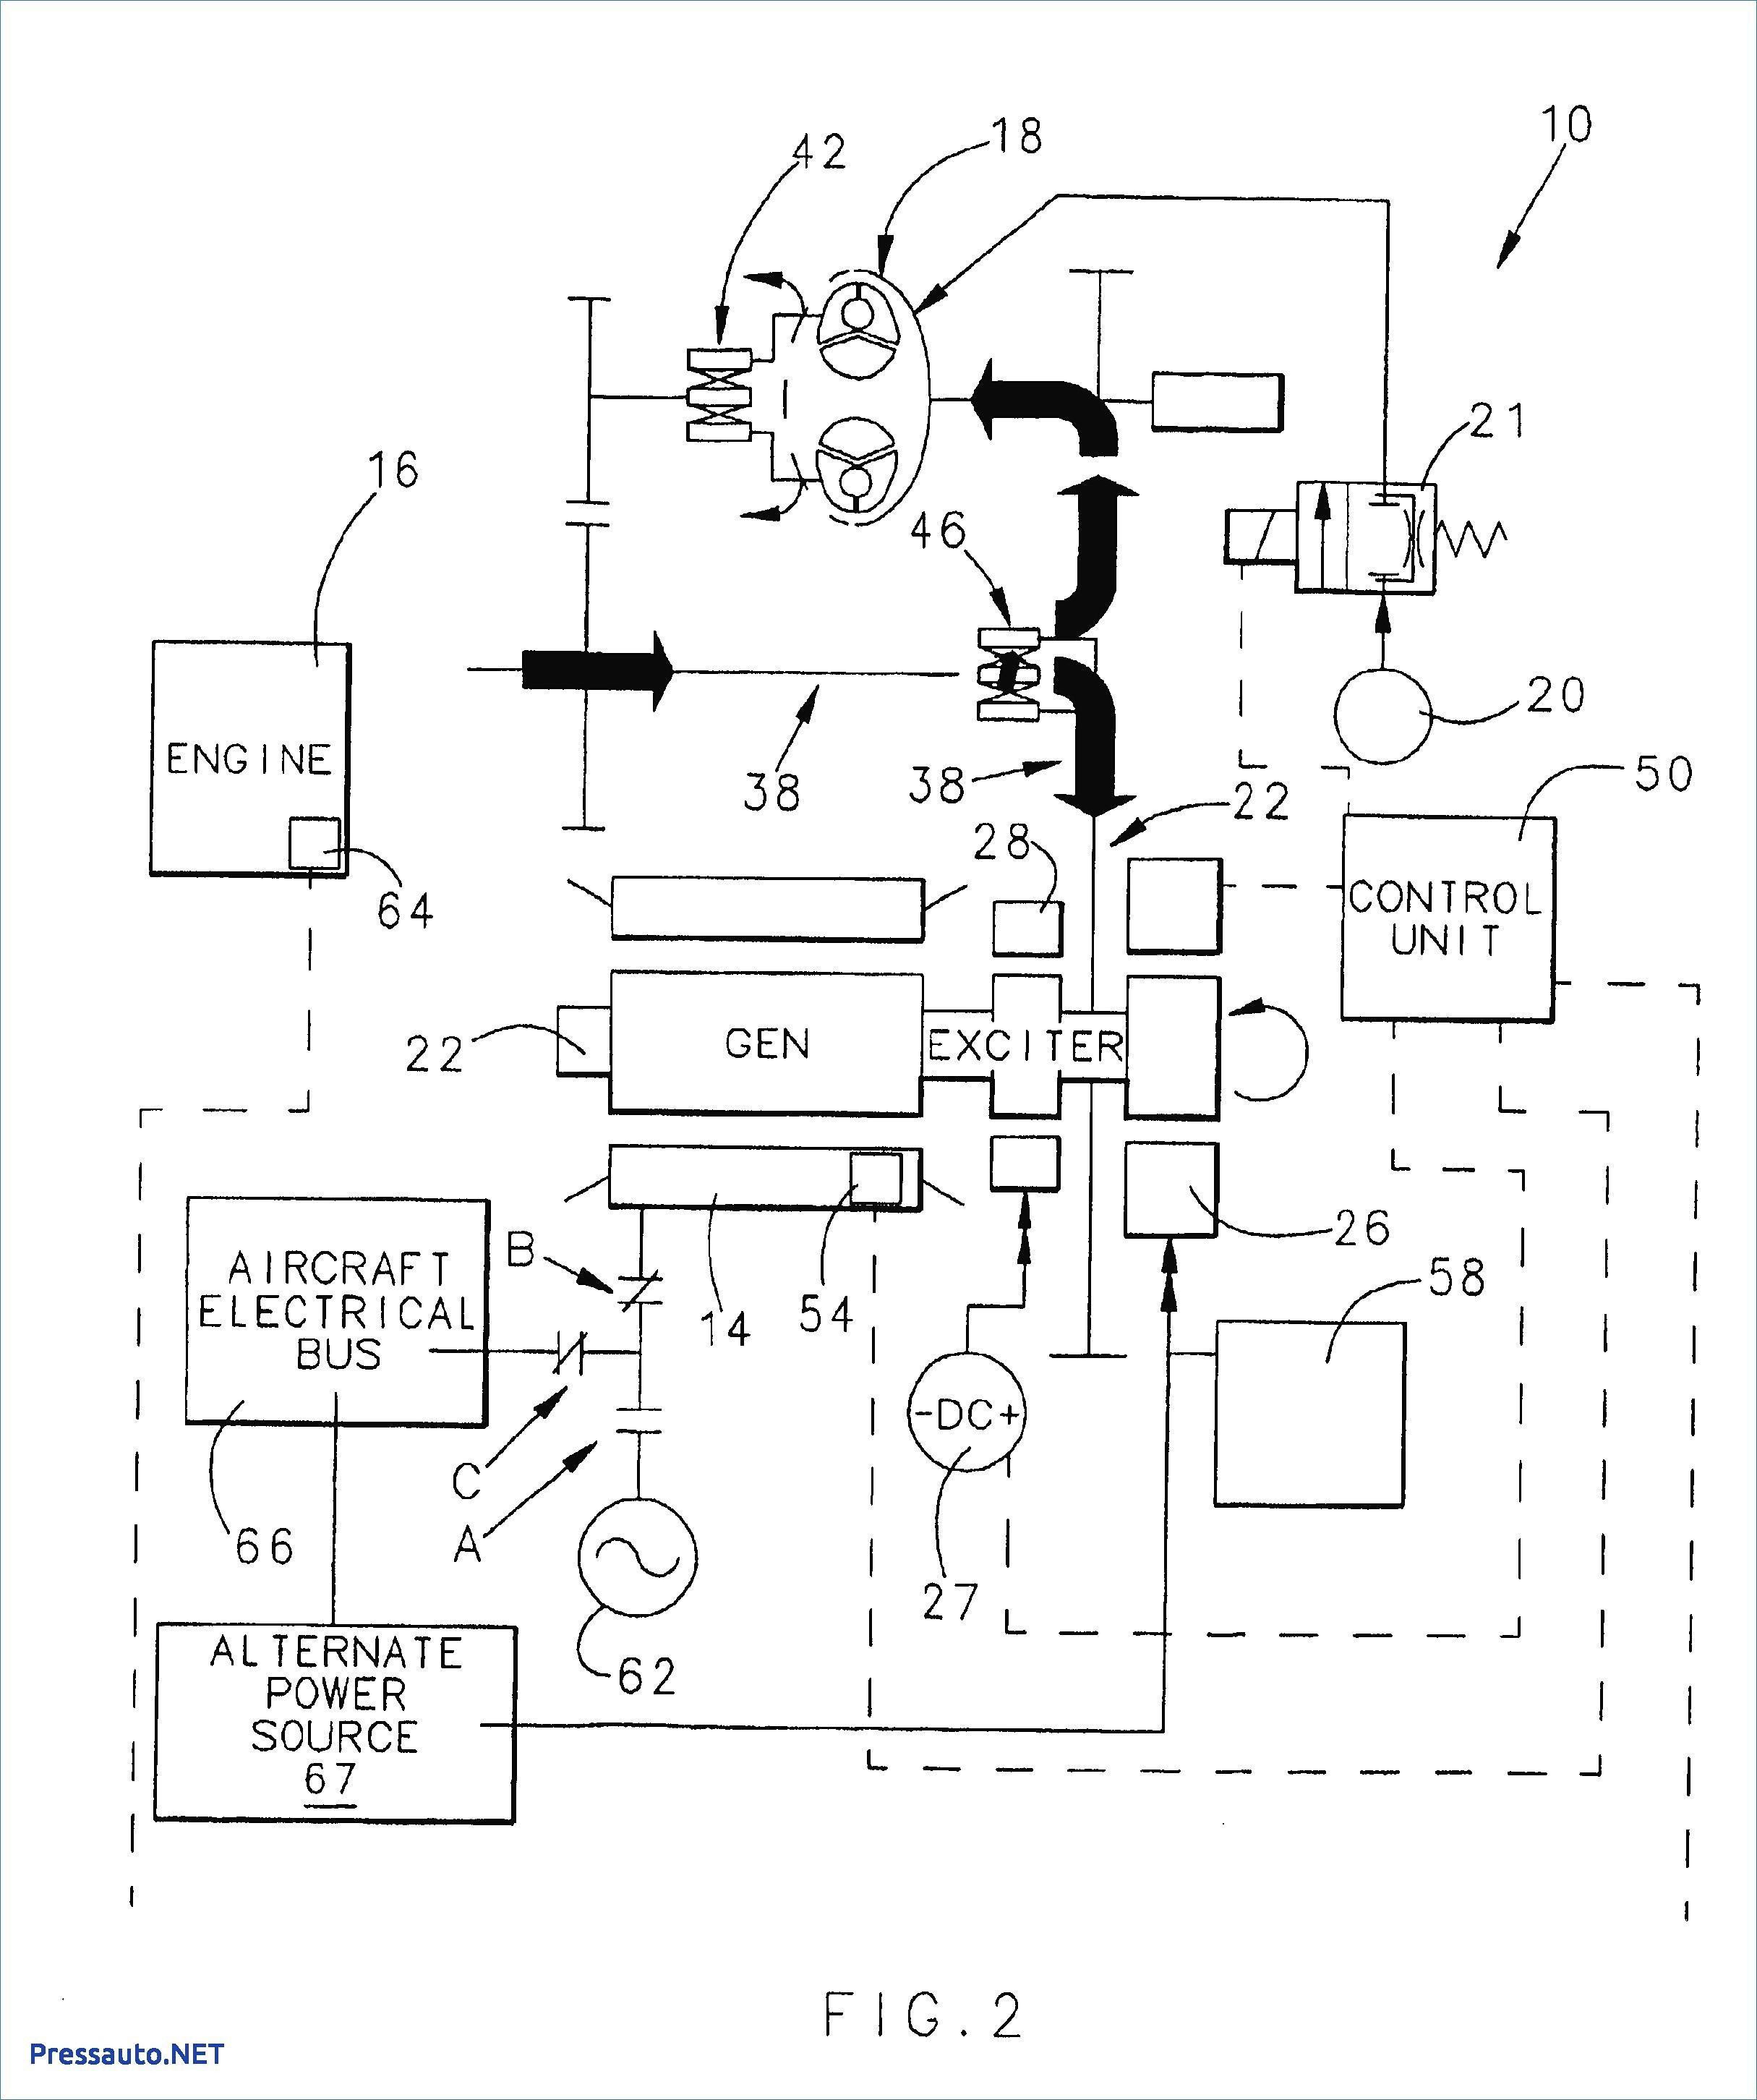 Kawasaki Brute Force 750 Wiring Diagram Unique 06 Mustang Fuse Box Schematics Wiring Wiring Diagrams